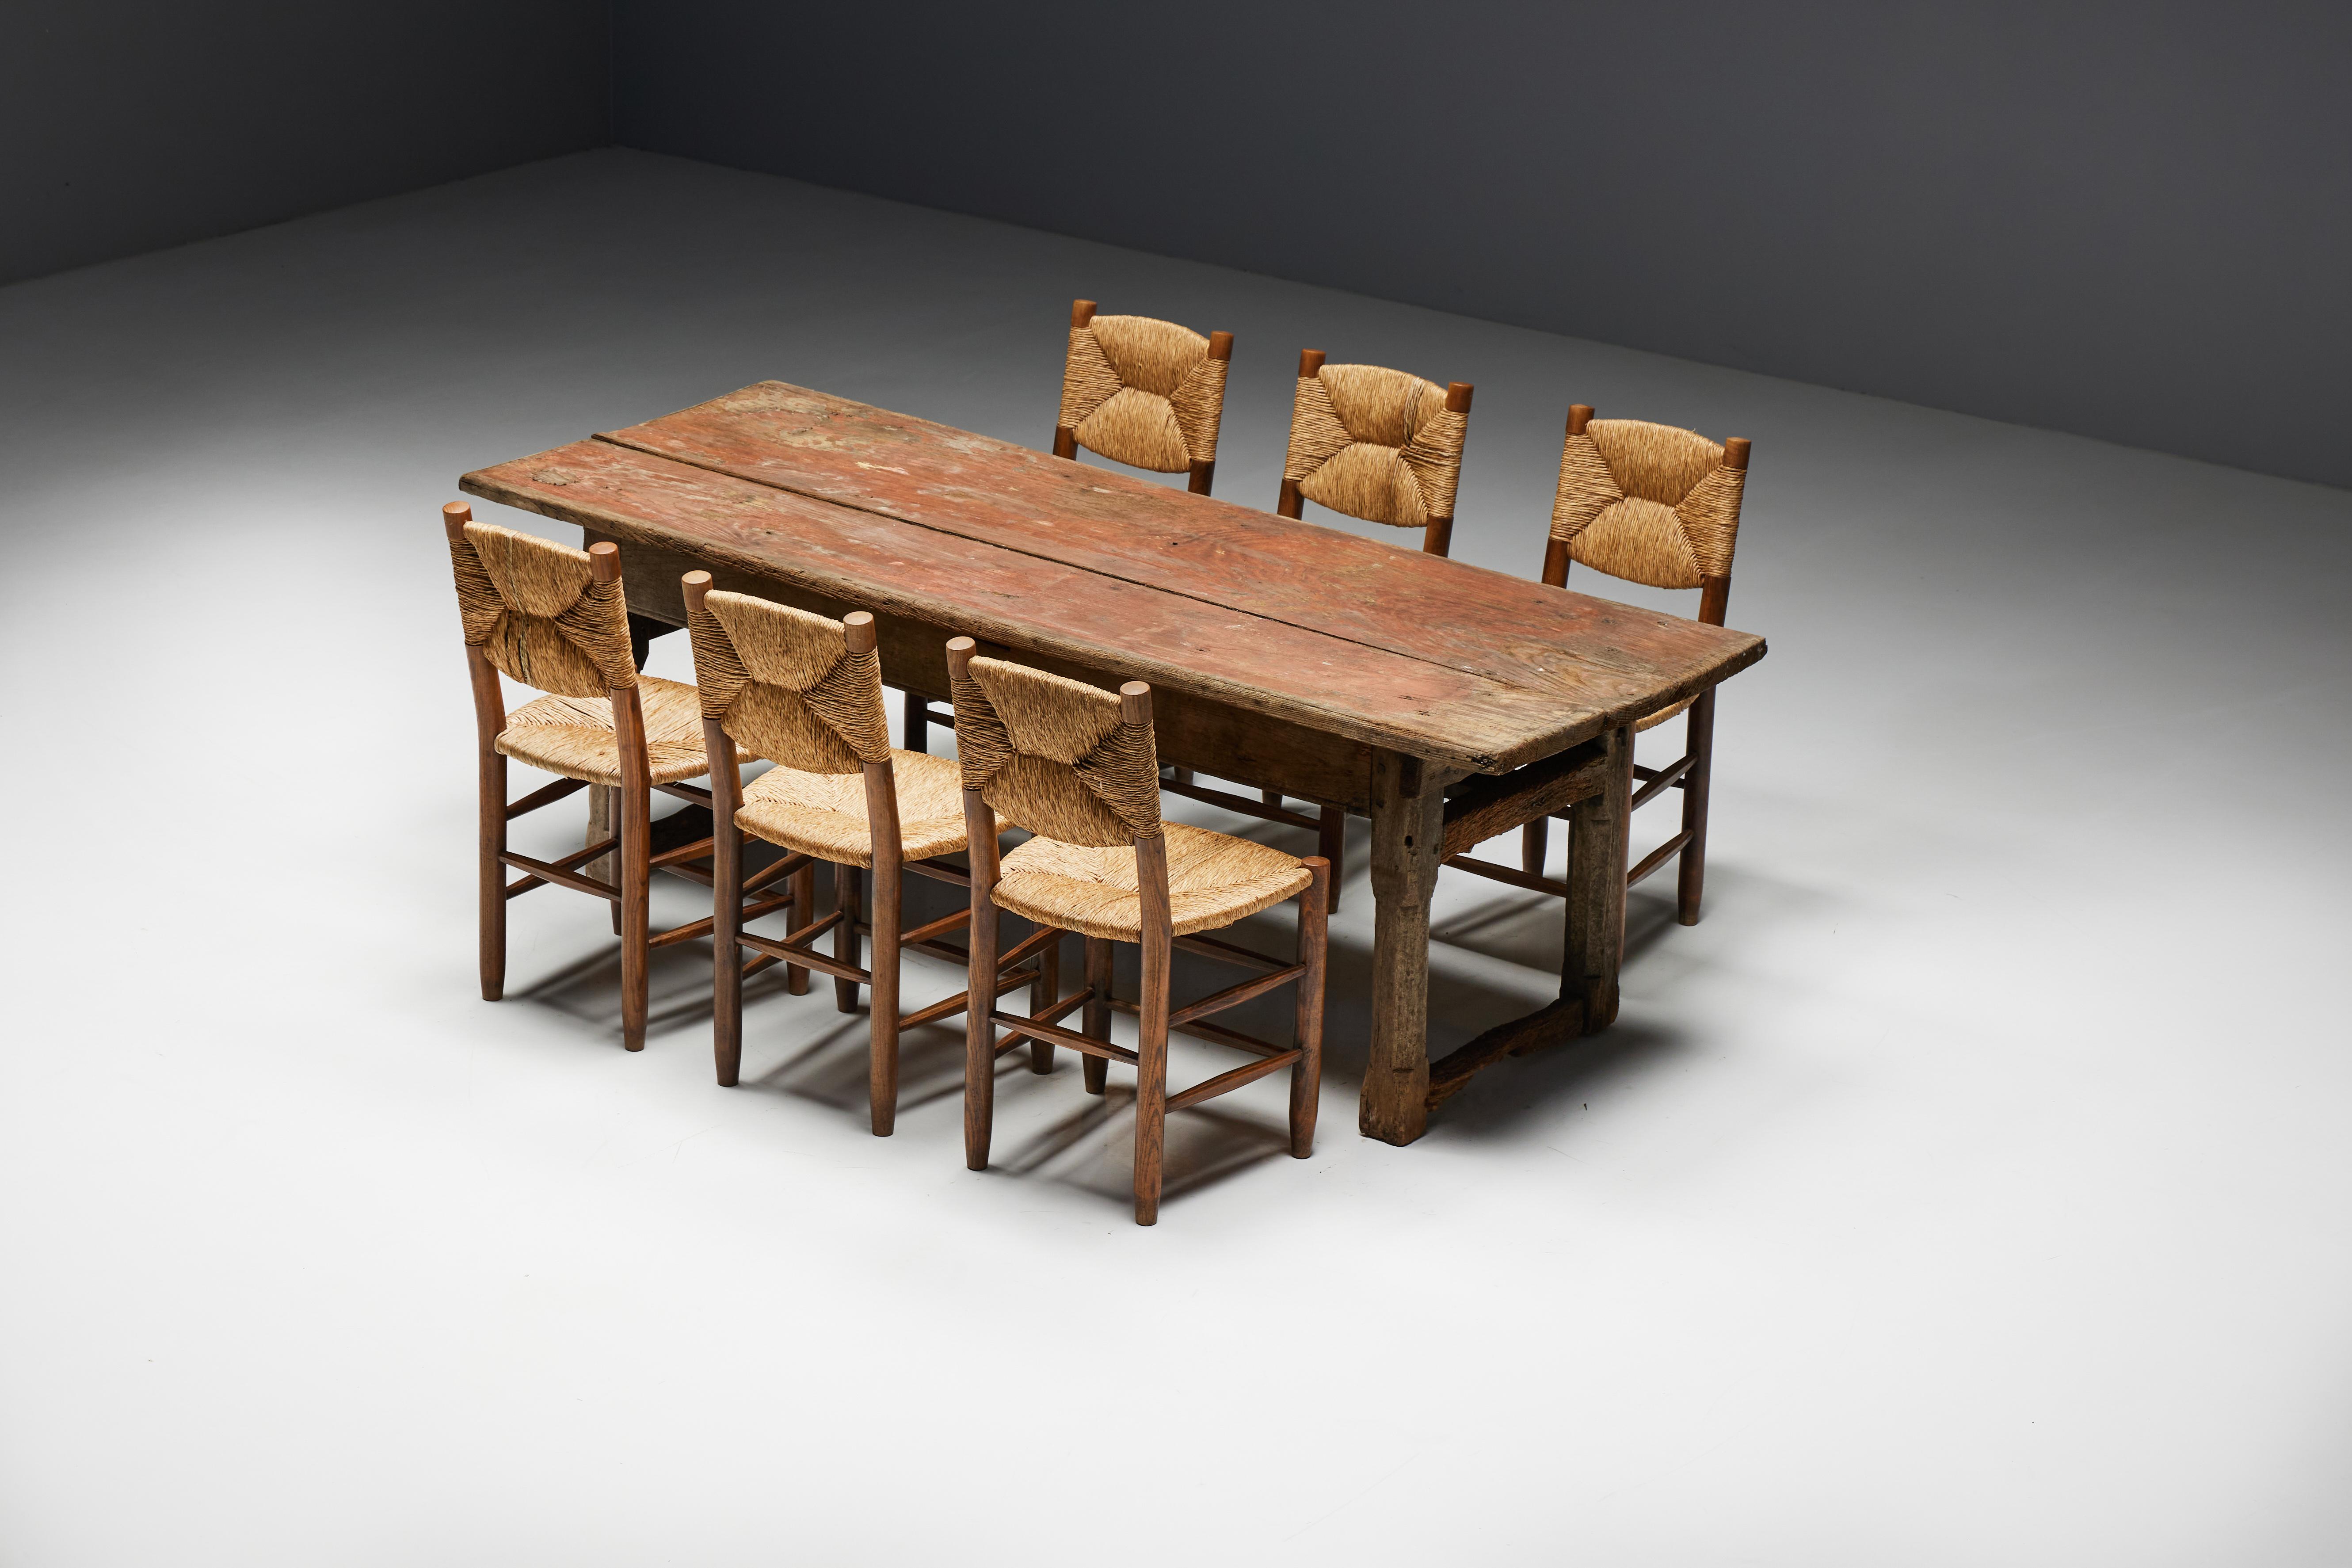 Rustic Travail Populaire Dining Table, France, Early 19th Century For Sale 9